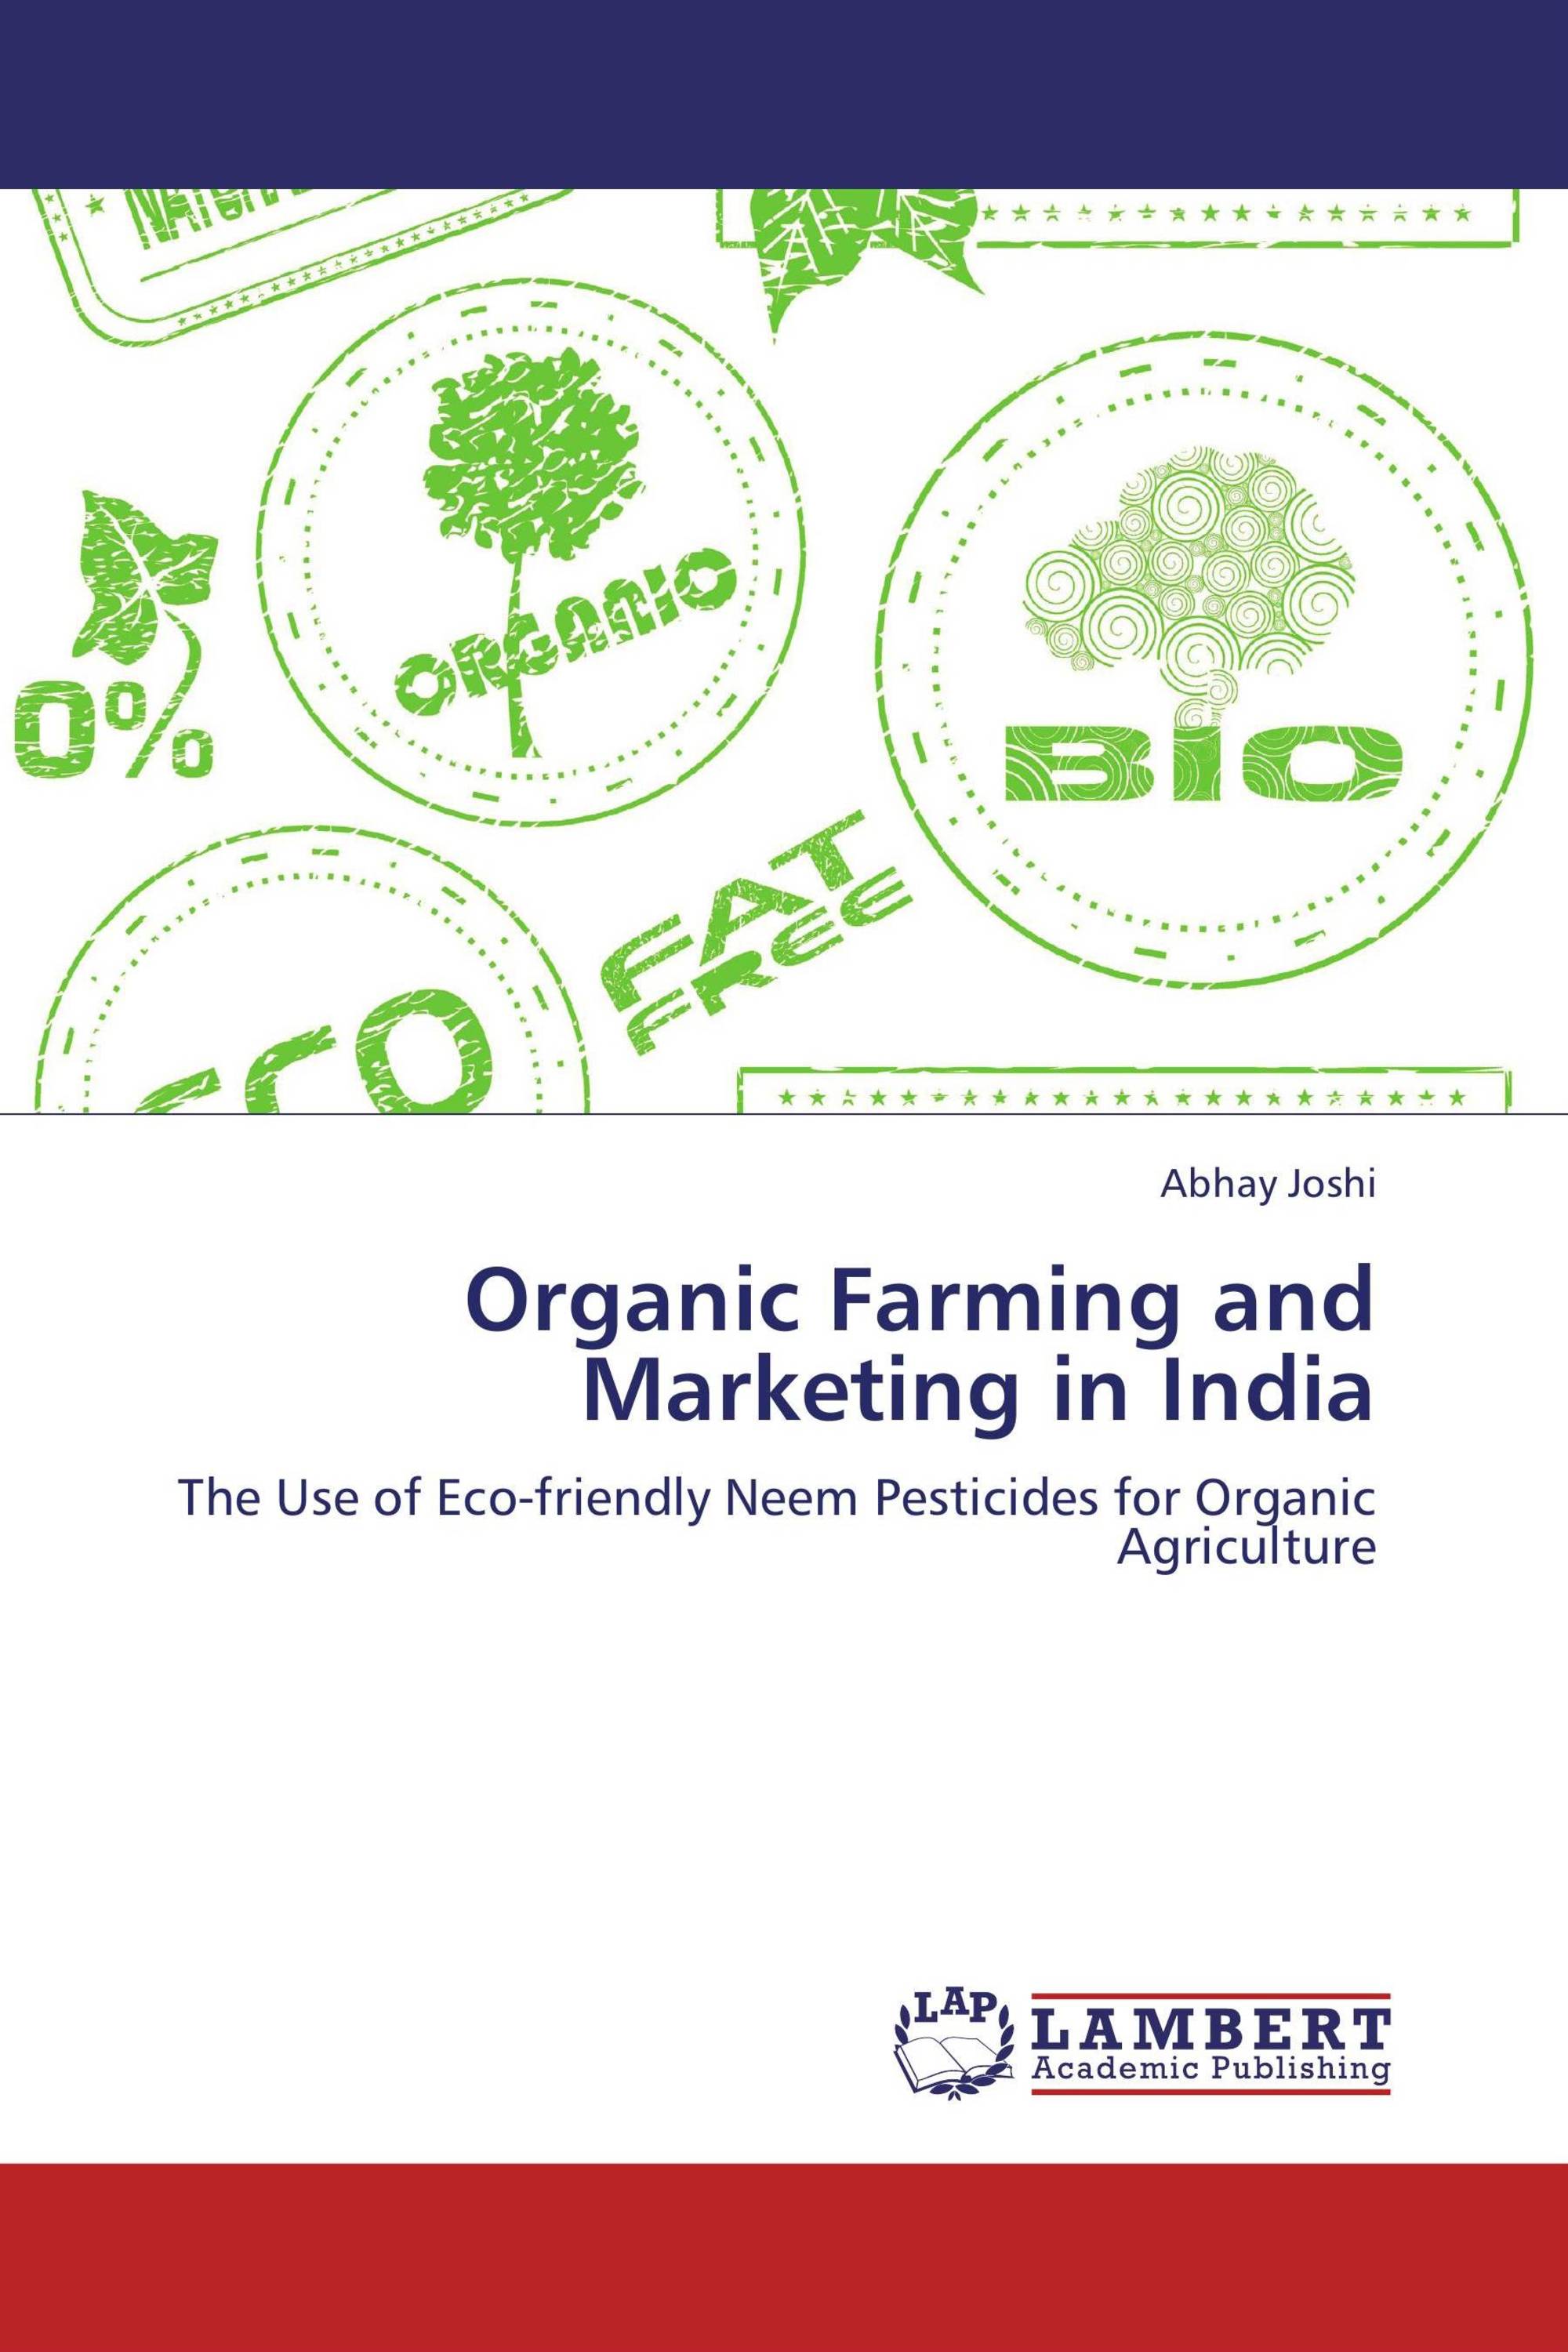 research paper on organic farming in india